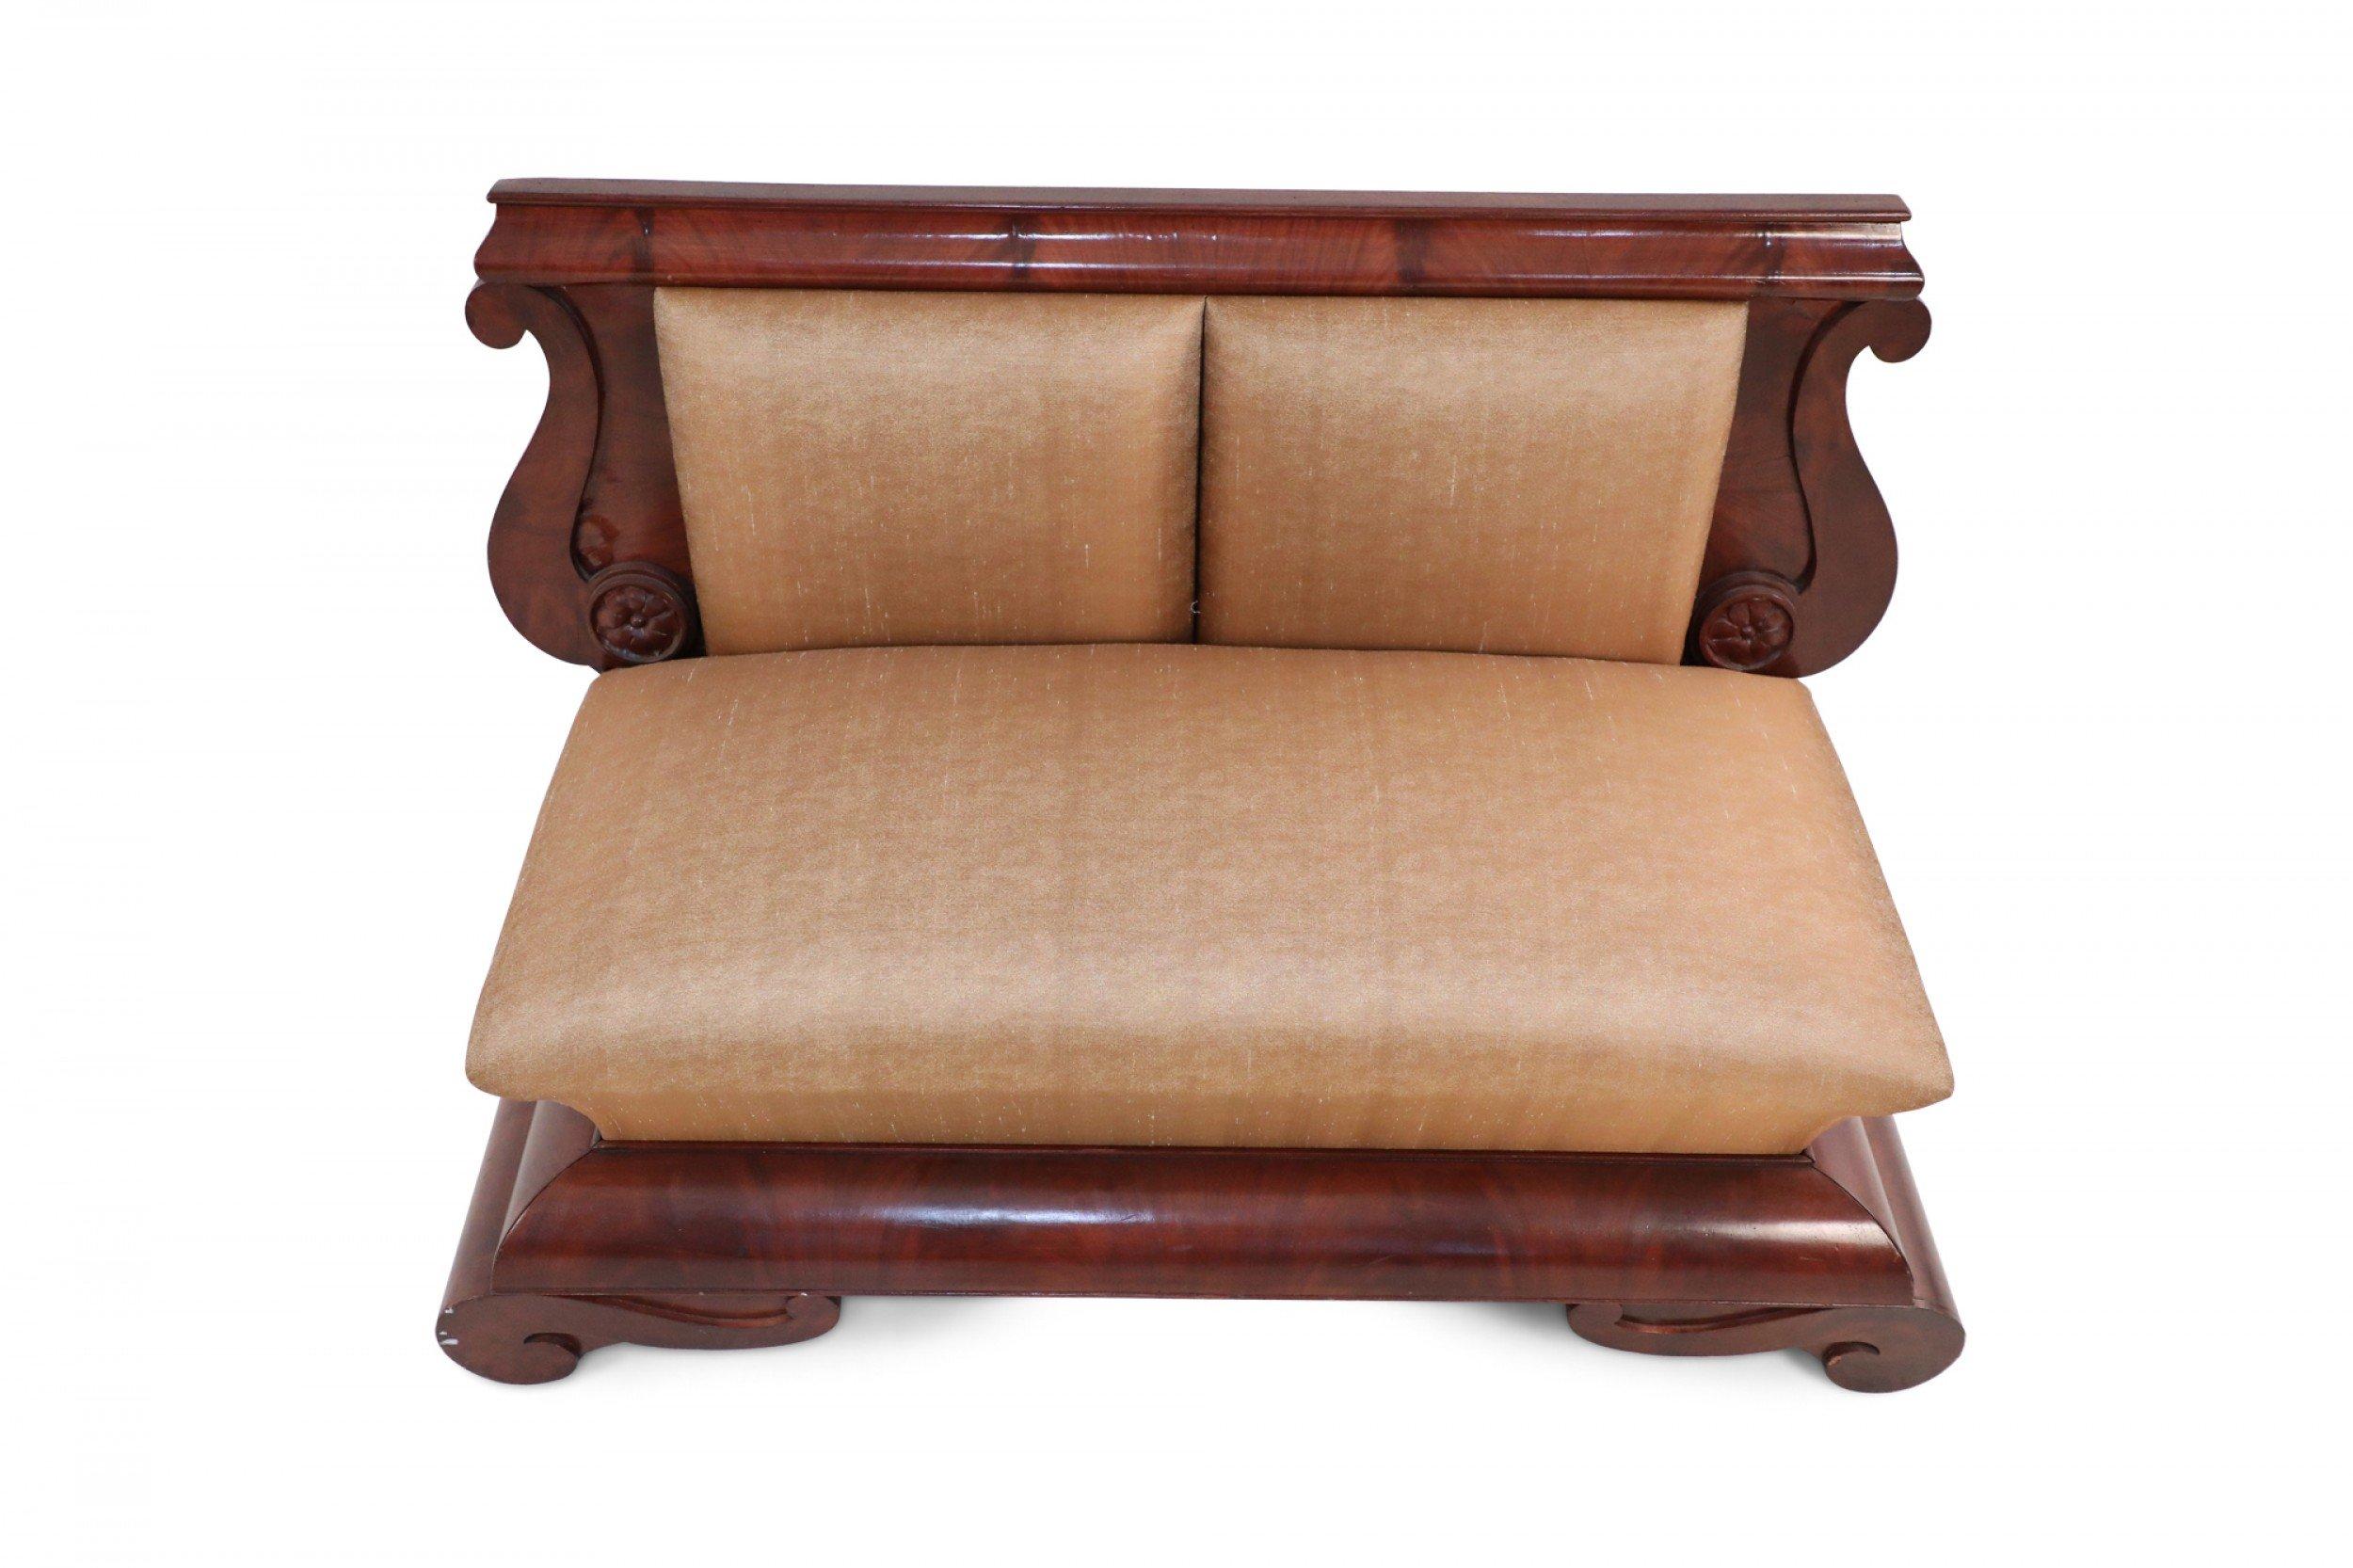 Pair of American Empire Crotch Mahogany Veneer Upholstered Window Seats For Sale 7